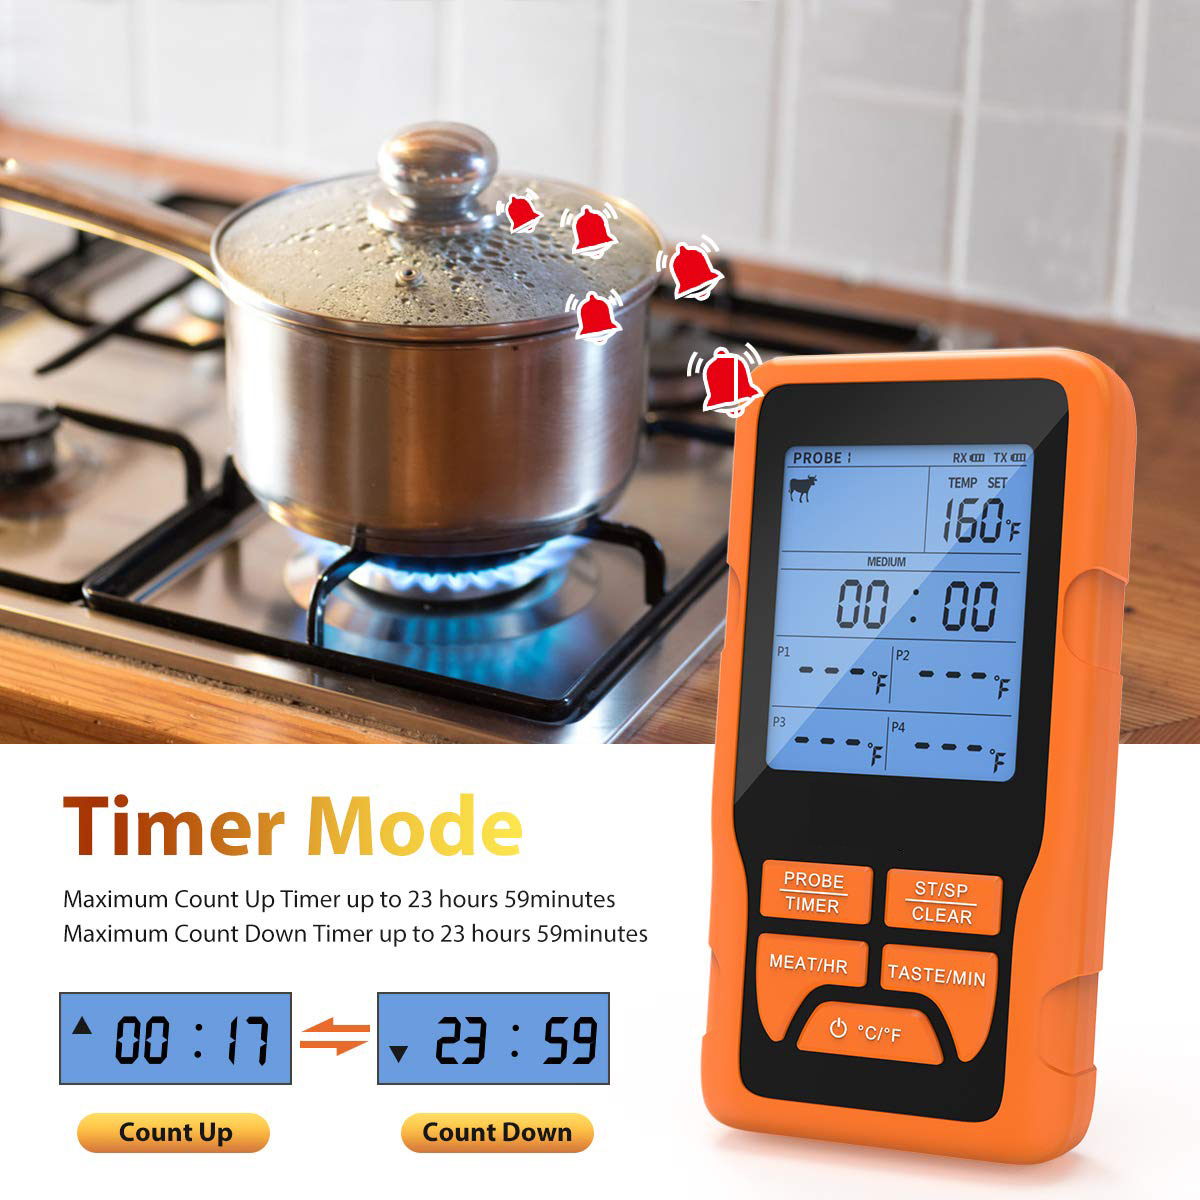 Digital Wireless Meat Thermometer for Grilling and Smoking 328FT Remote Chef Alarm 4 Temp Probes for Oven BBQ Kitchen Cooking.